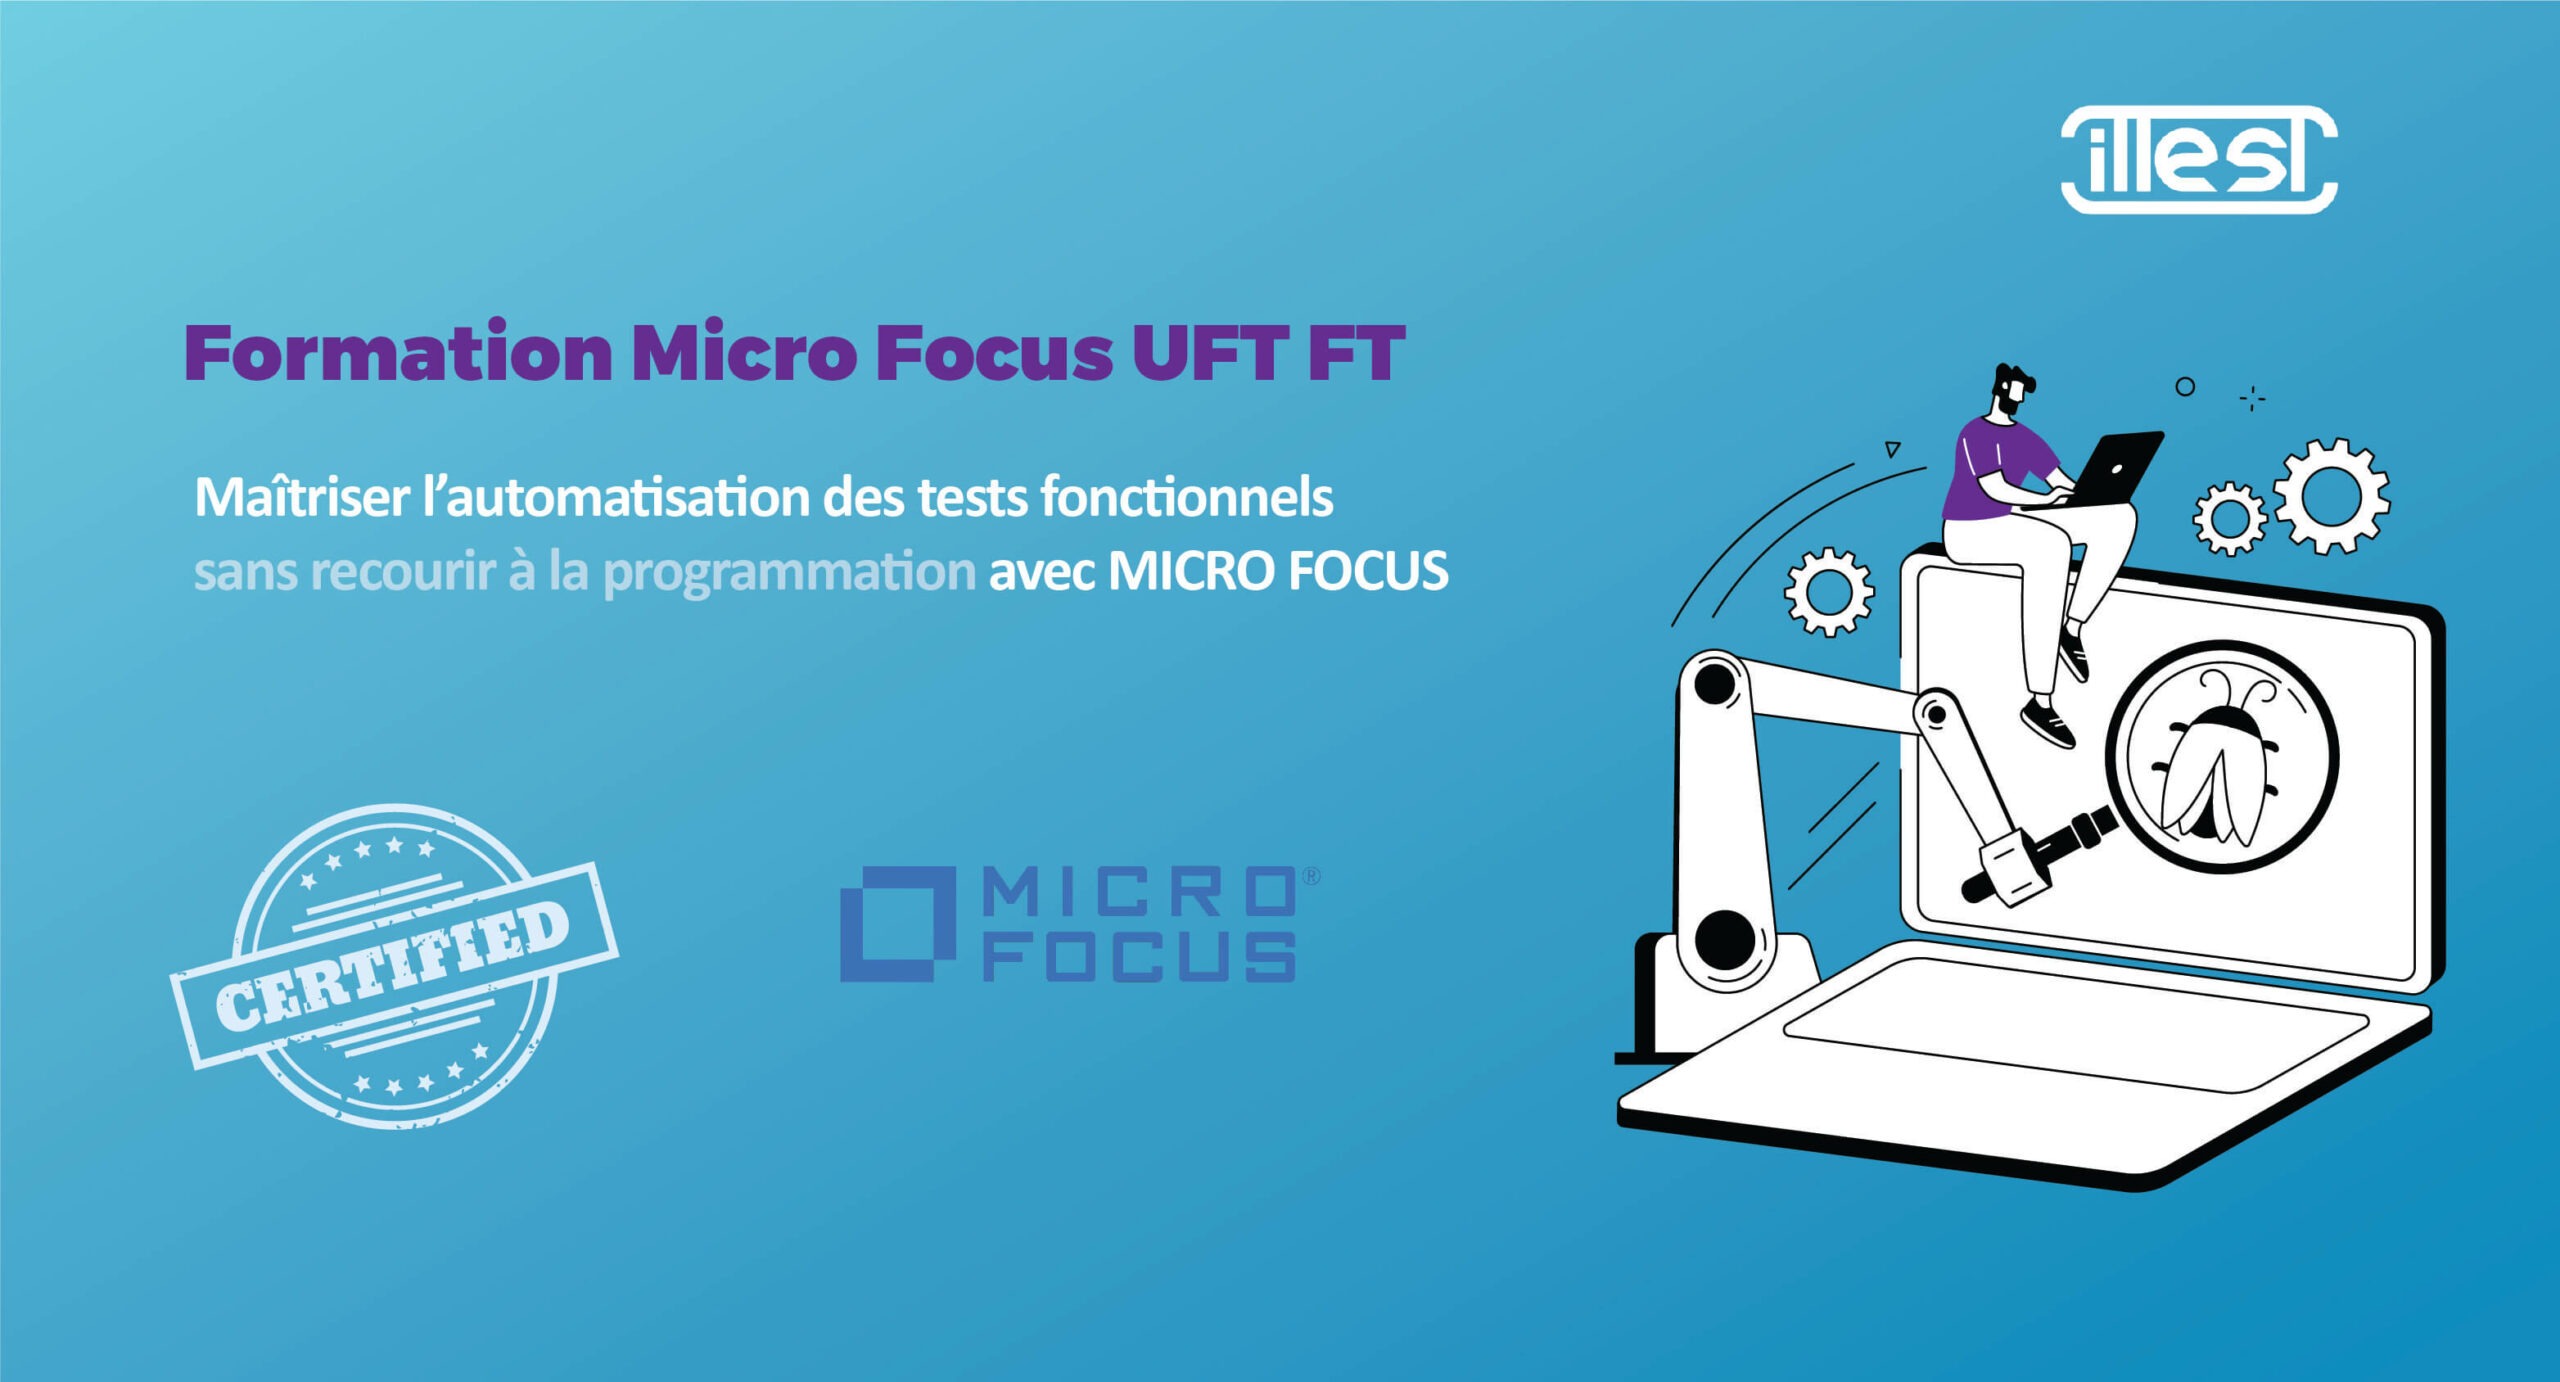 Formation Micro Focus UFT FT